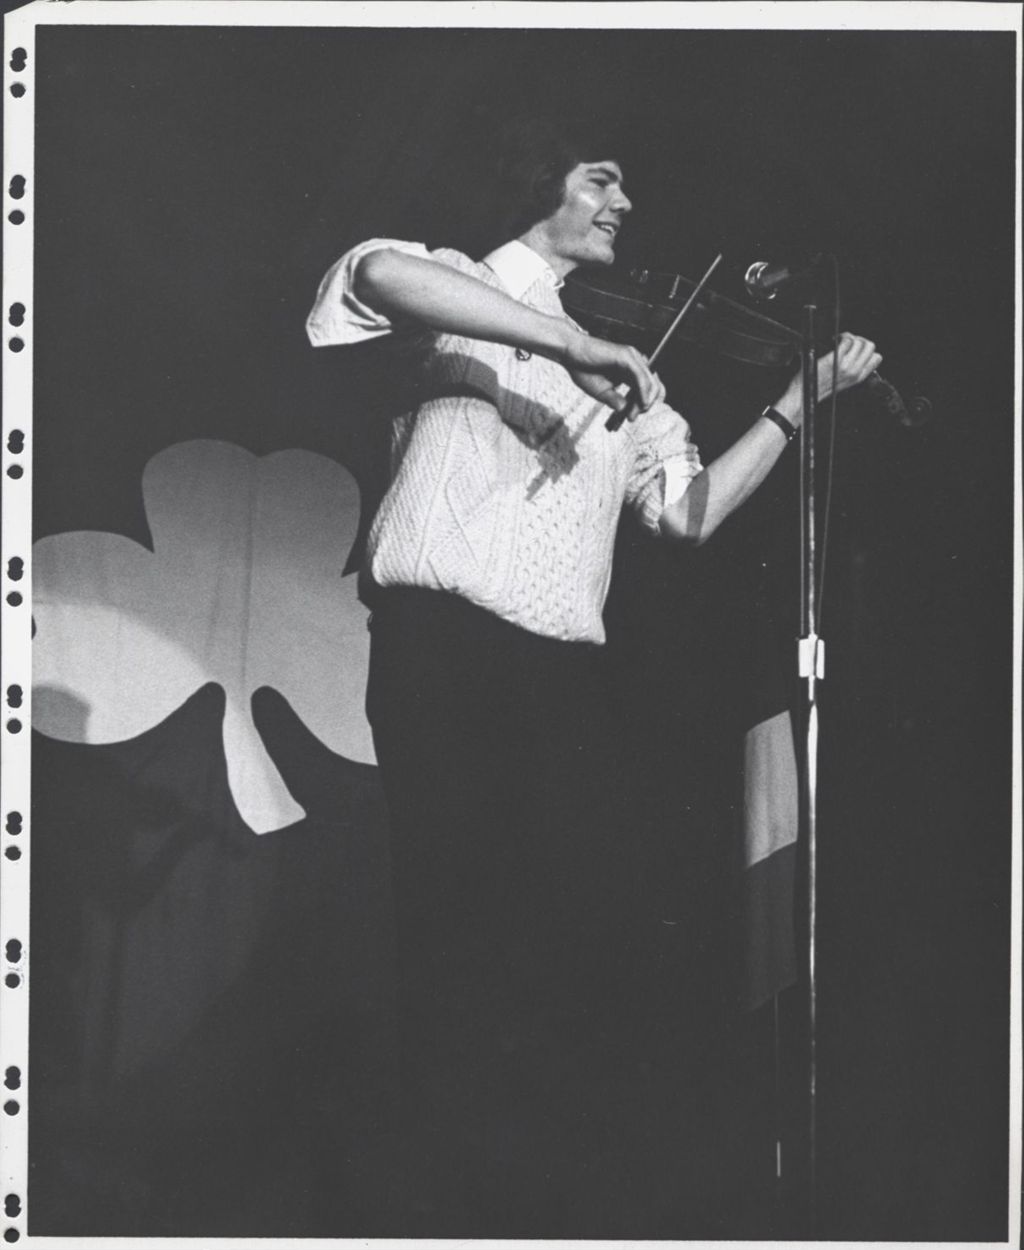 Fiddler playing at a microphone